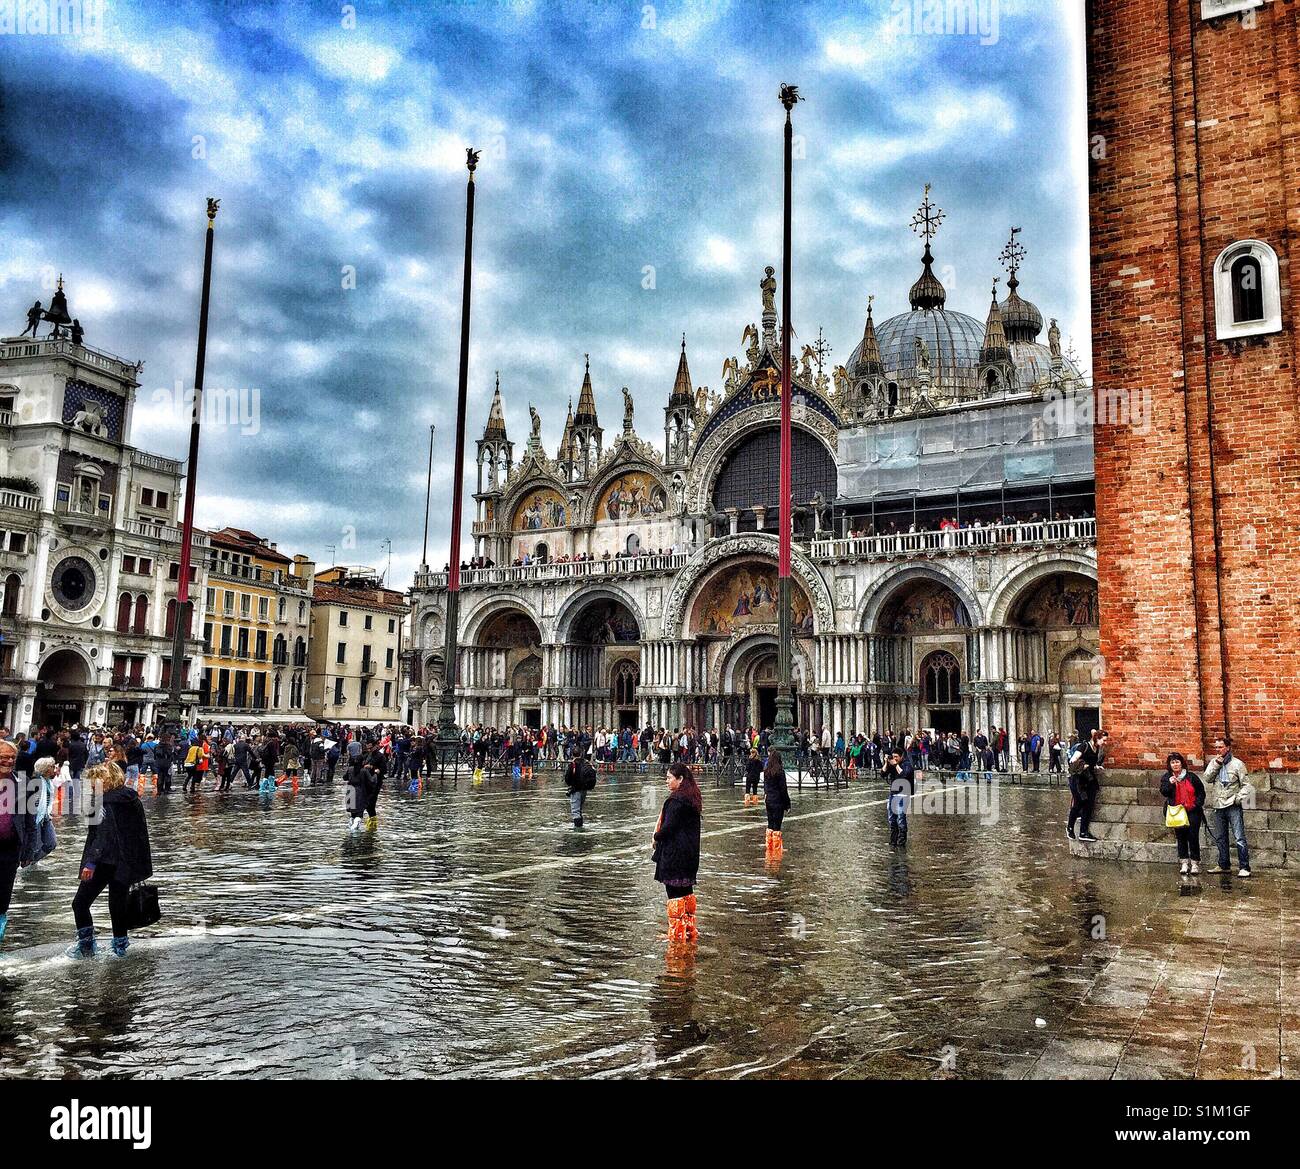 High flood waters in Piazza San Marco, Venice. Stock Photo